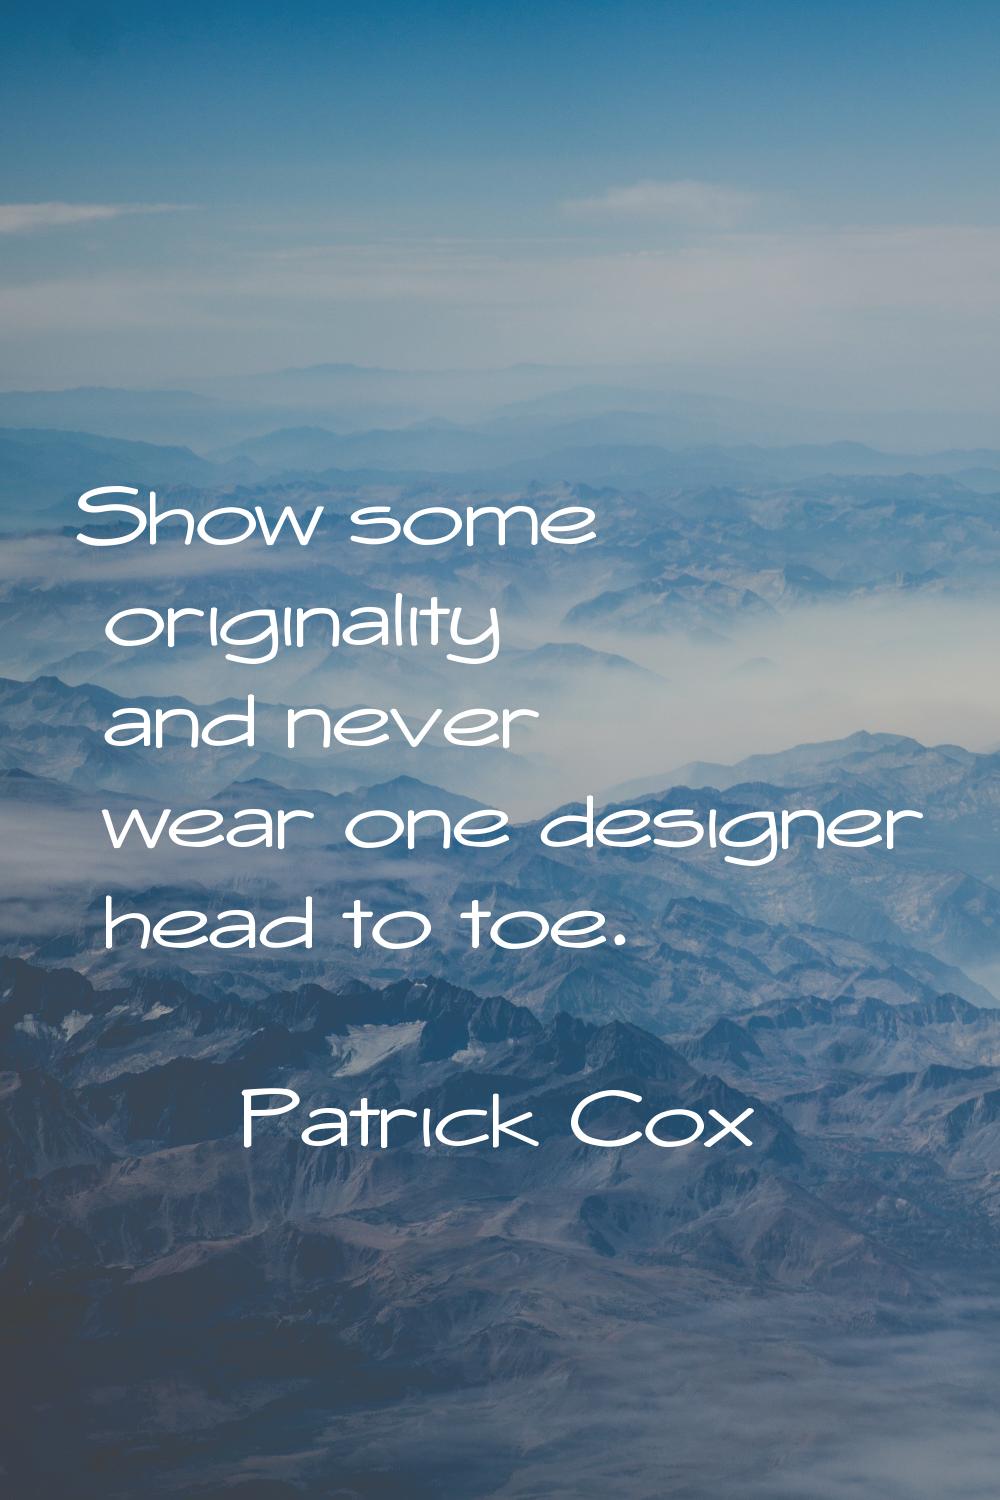 Show some originality and never wear one designer head to toe.